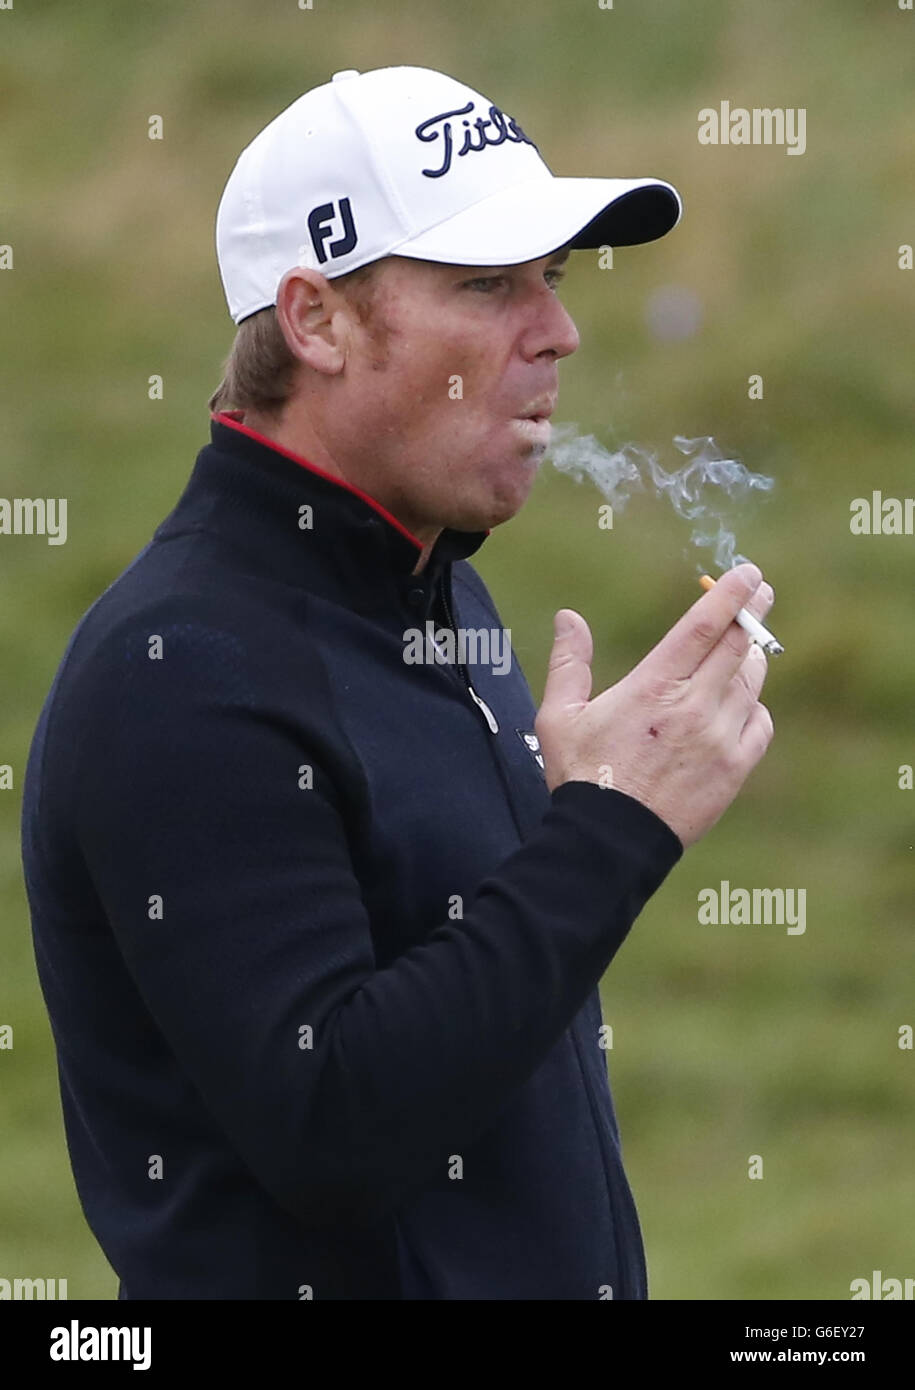 Golf - 2013 Alfred Dunhill Links Championship - Day Two - Carnoustie. Shane Warne during day Two of the 2013 Alfred Dunhill Links Championships at Carnoustie Golf Course. Stock Photo